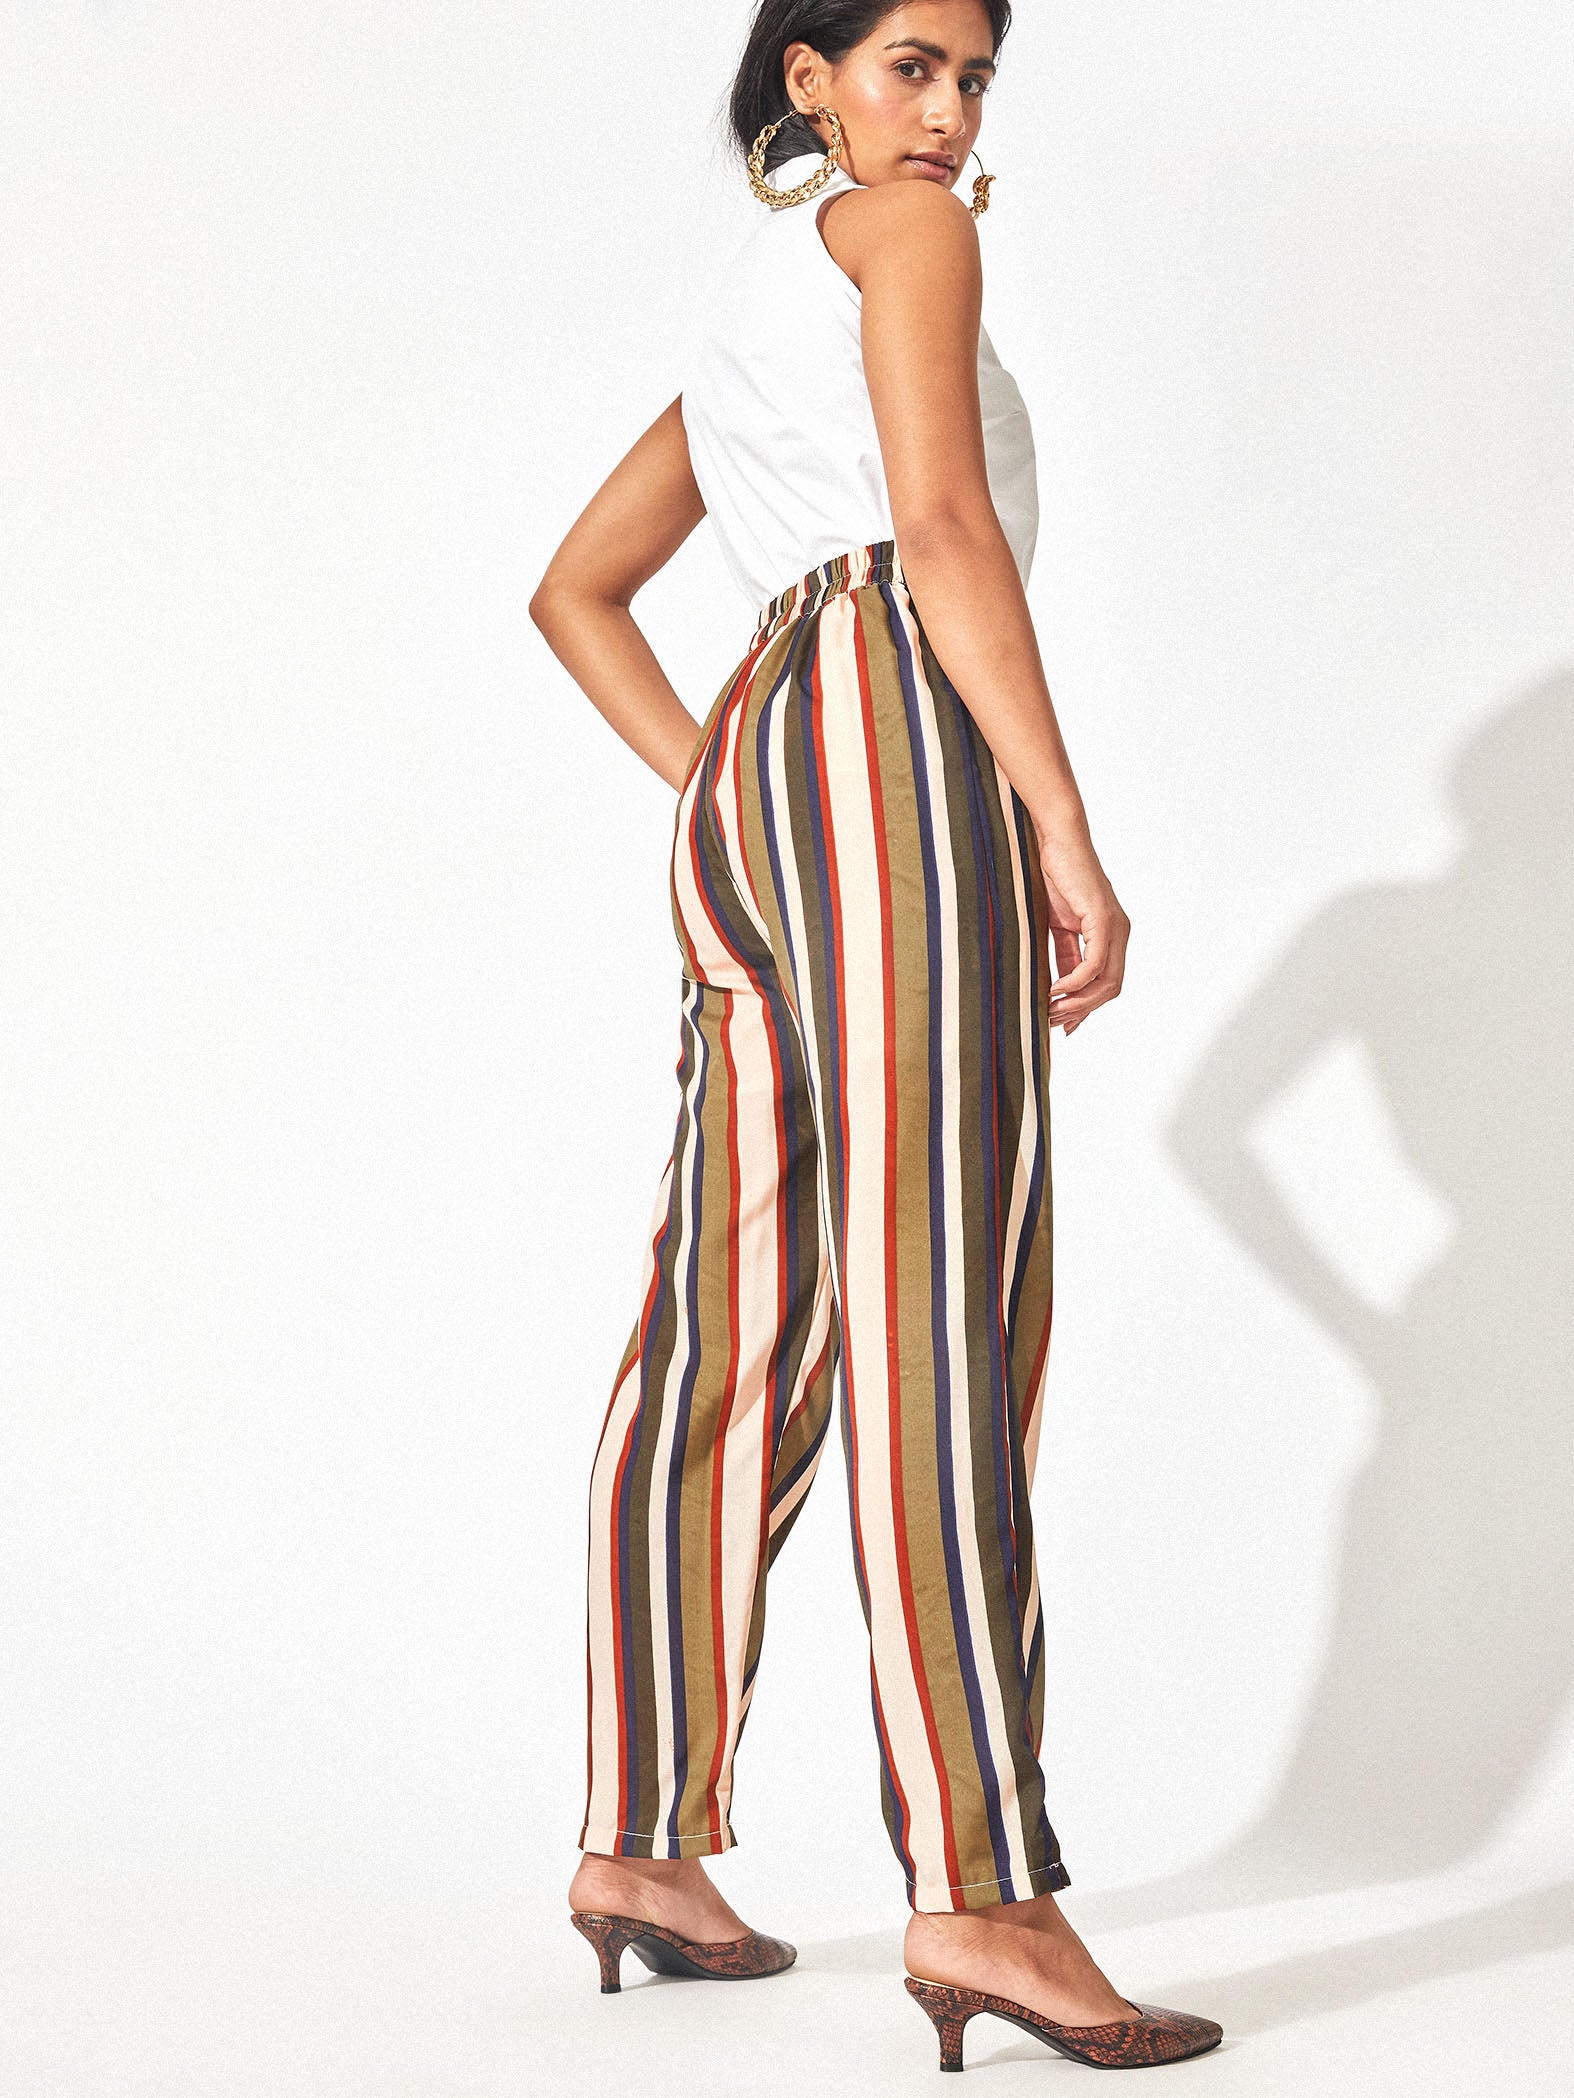 Forest Striped Tapered Pants